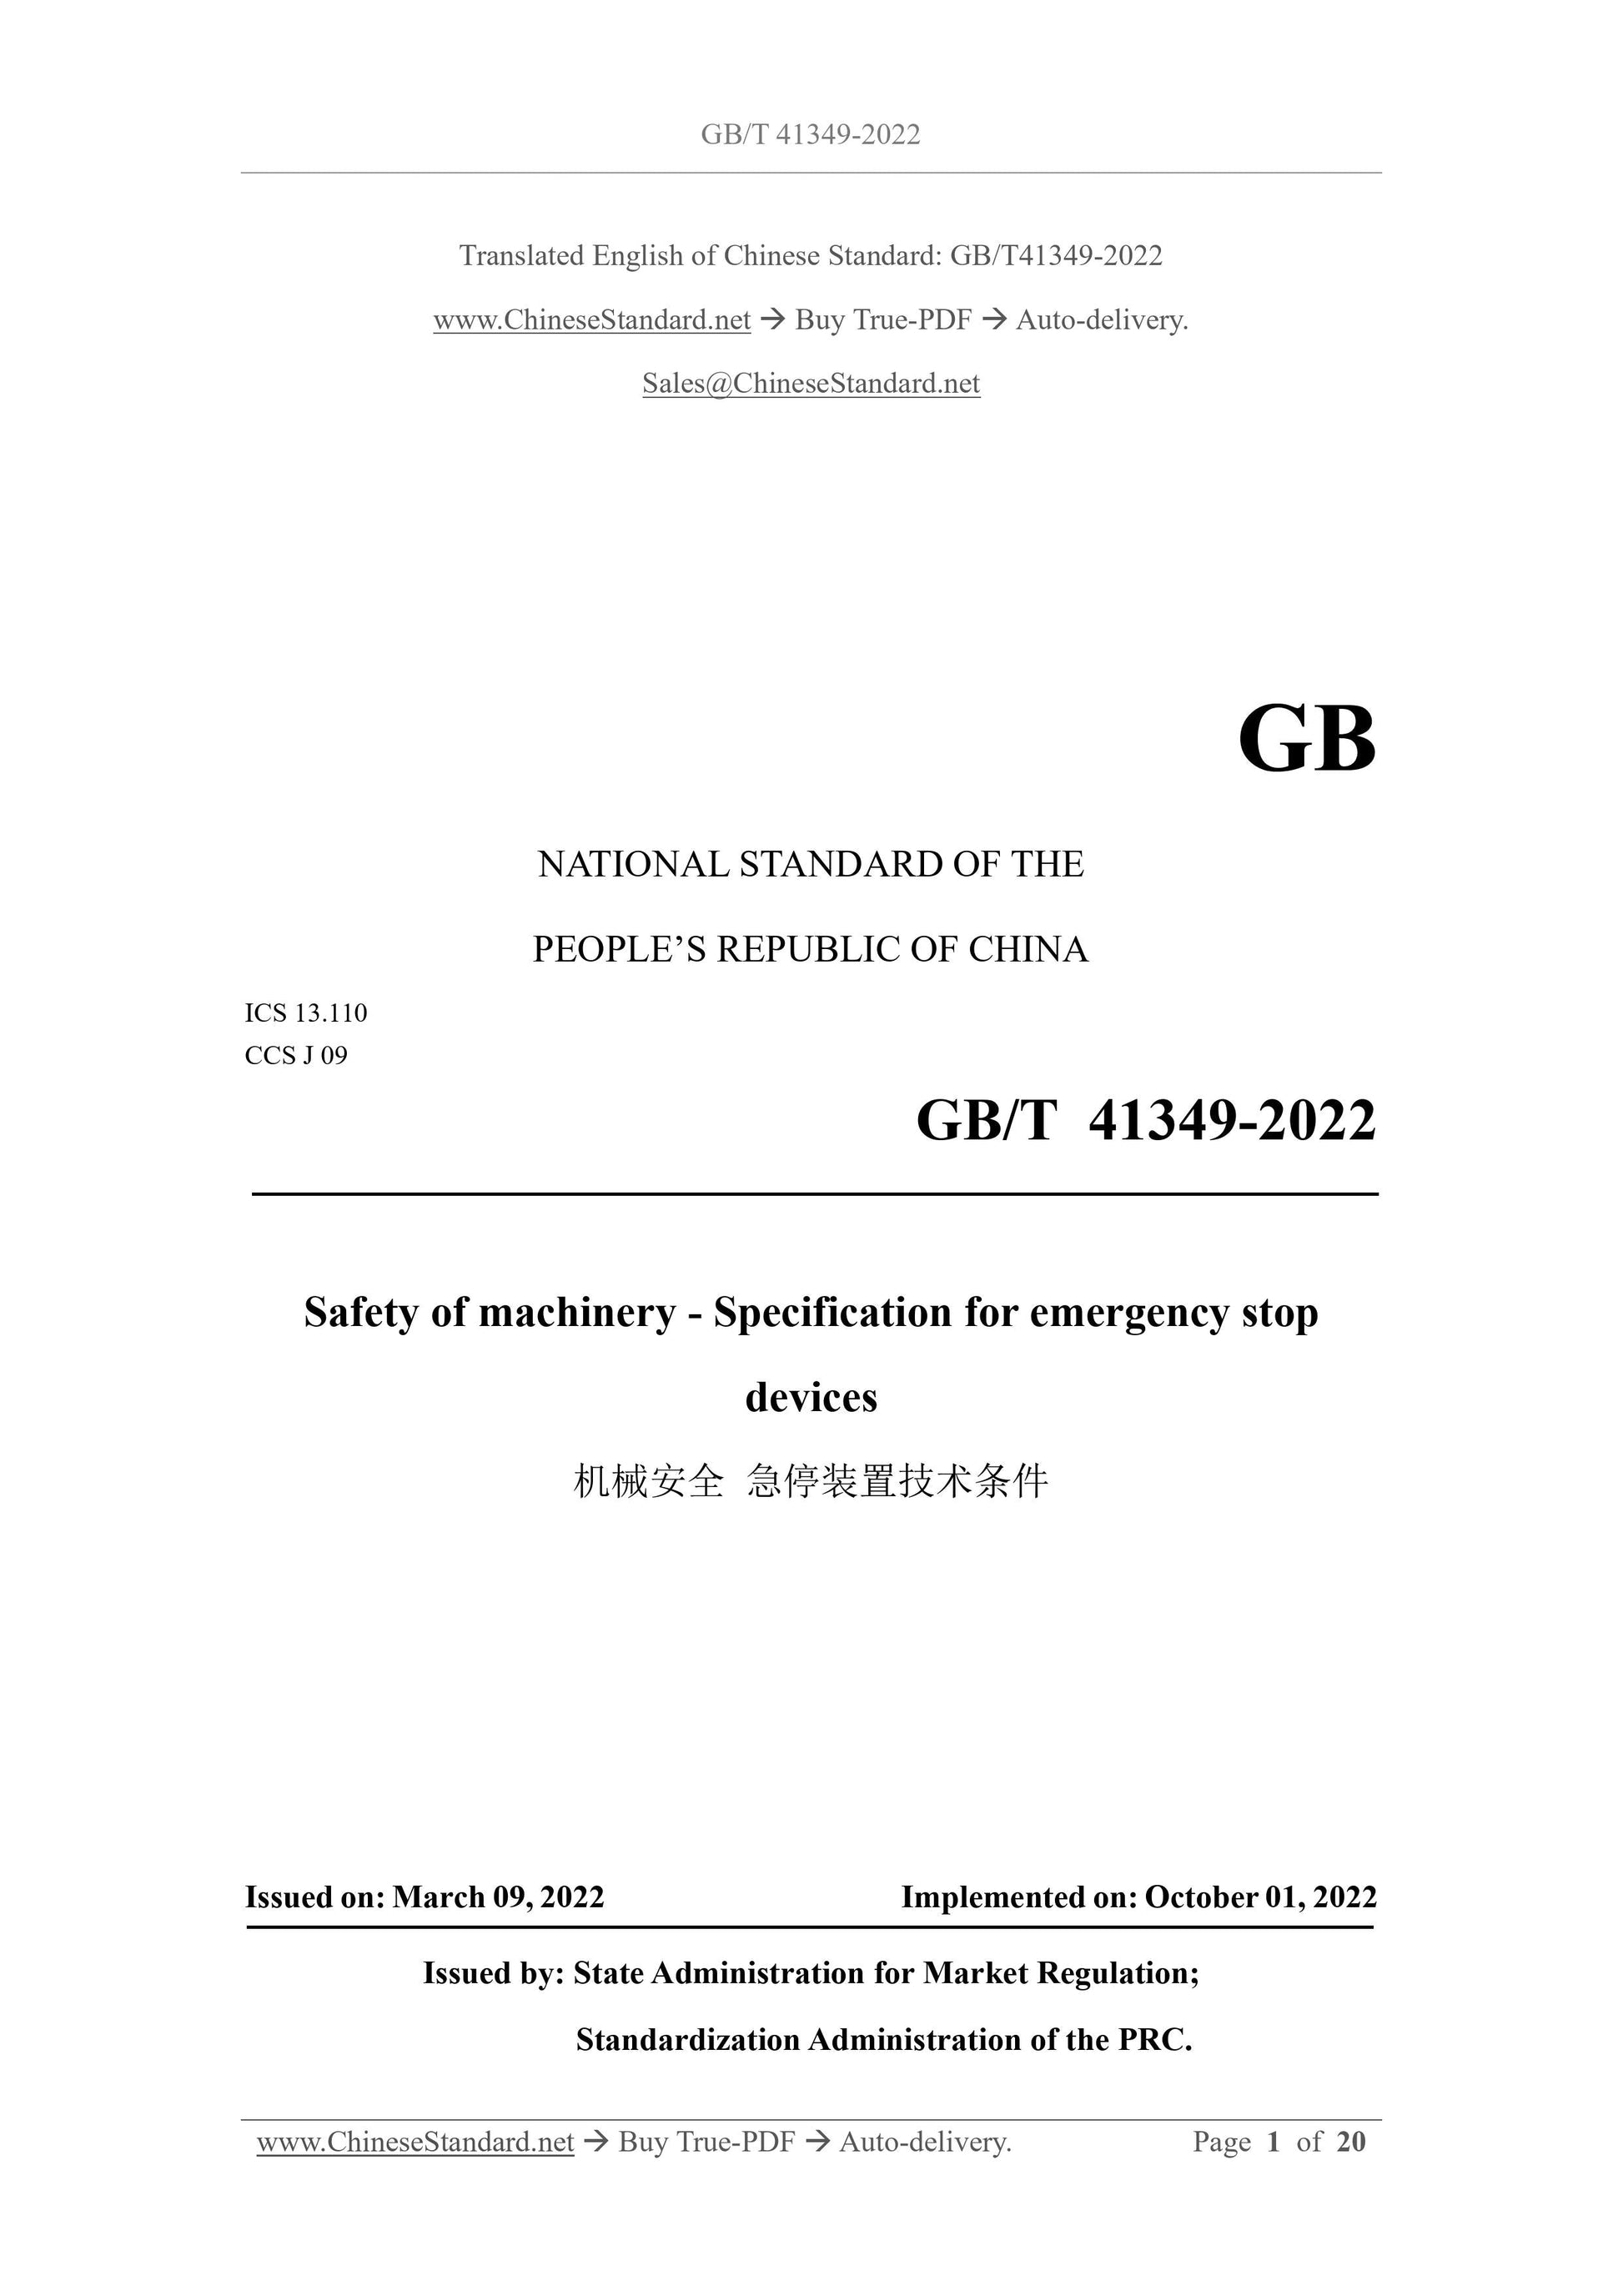 GB/T 41349-2022 Page 1